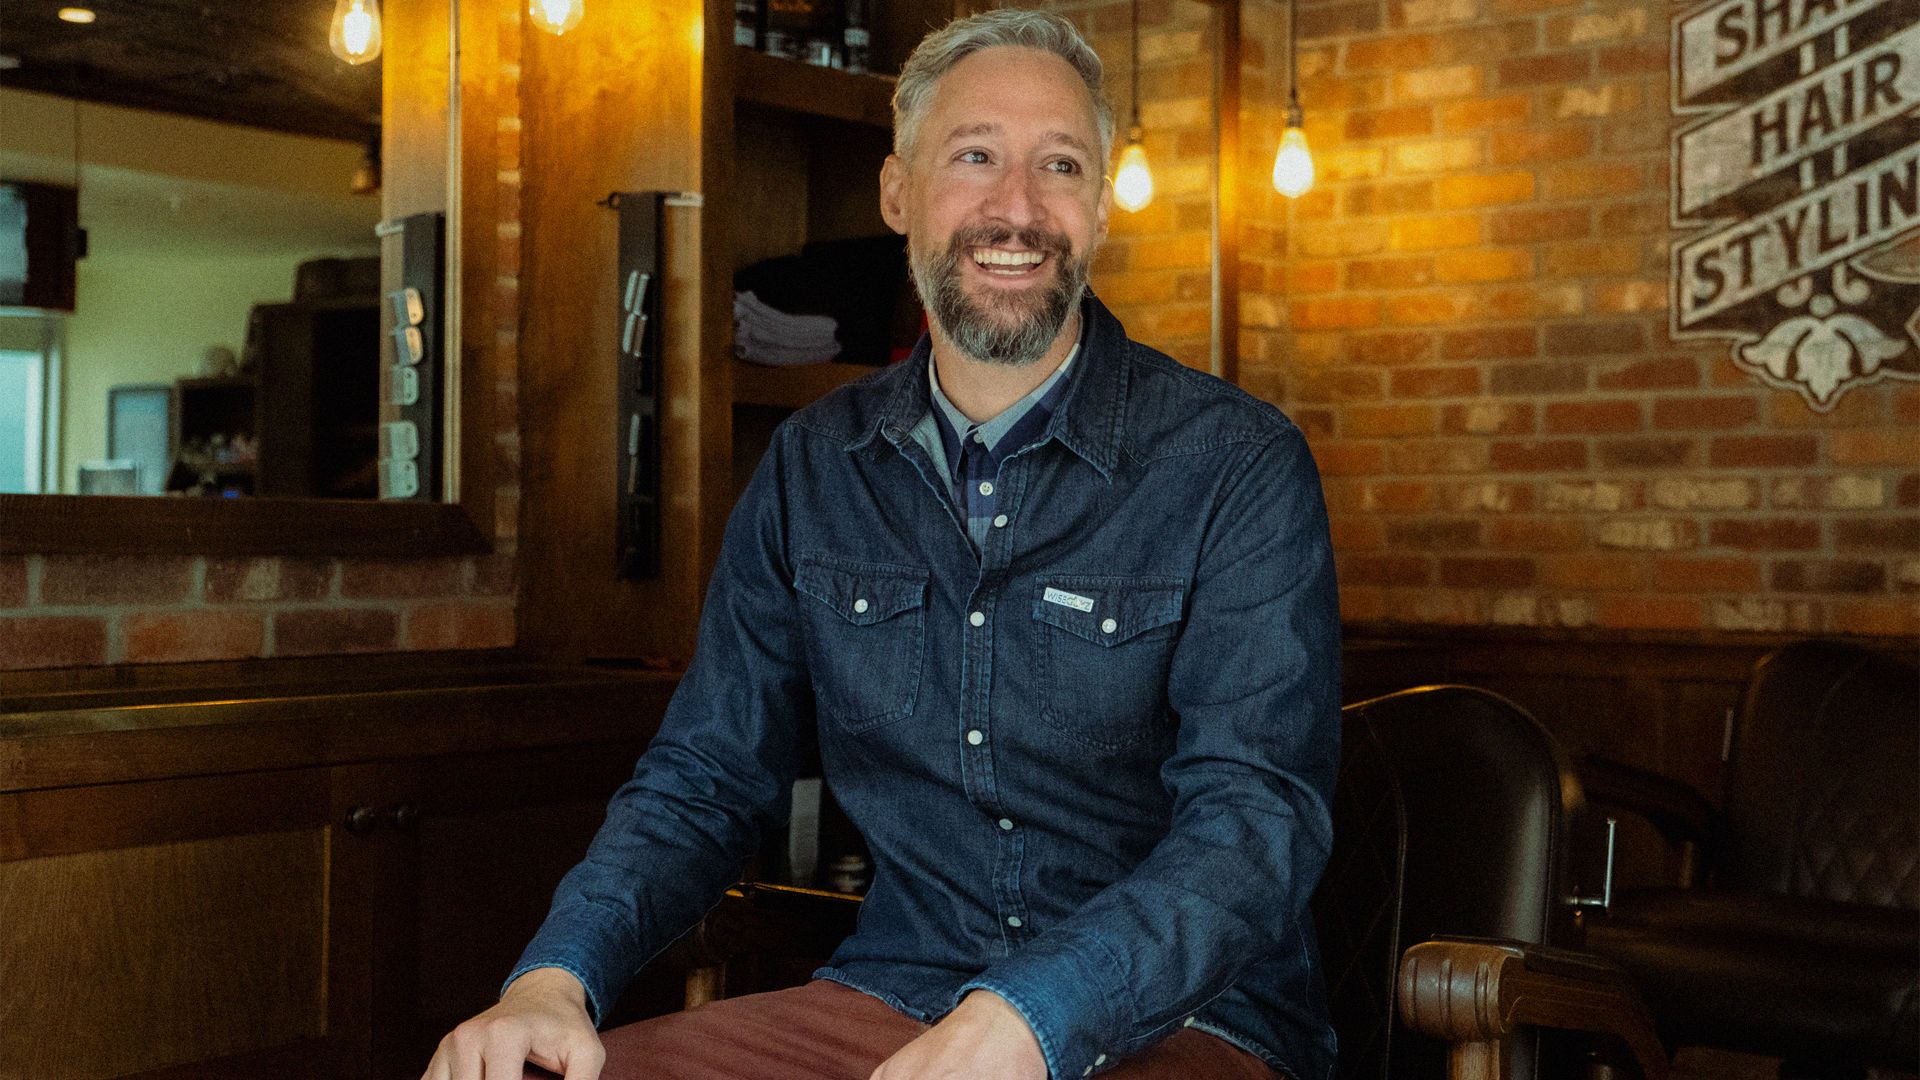 A man in a button up denim shirt smiles for a portrait in barber chair